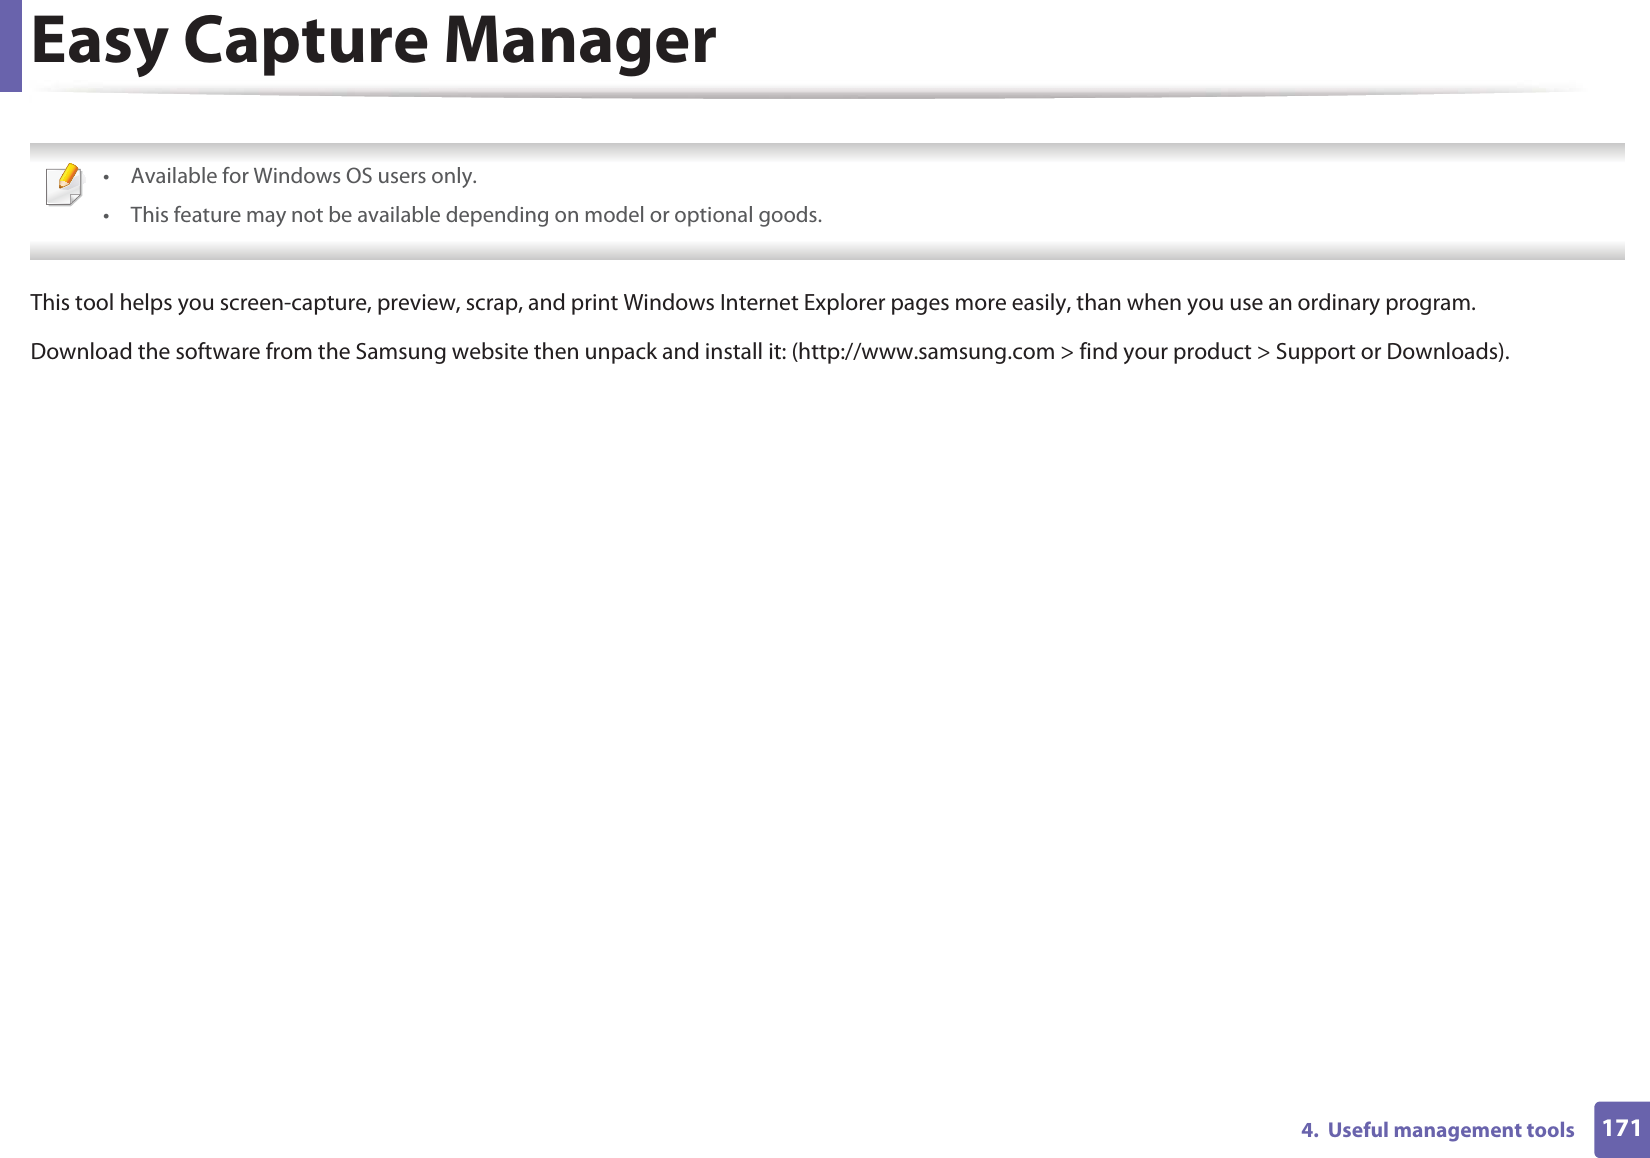 1714.  Useful management toolsEasy Capture Manager • Available for Windows OS users only.• This feature may not be available depending on model or optional goods. This tool helps you screen-capture, preview, scrap, and print Windows Internet Explorer pages more easily, than when you use an ordinary program. Download the software from the Samsung website then unpack and install it: (http://www.samsung.com &gt; find your product &gt; Support or Downloads).